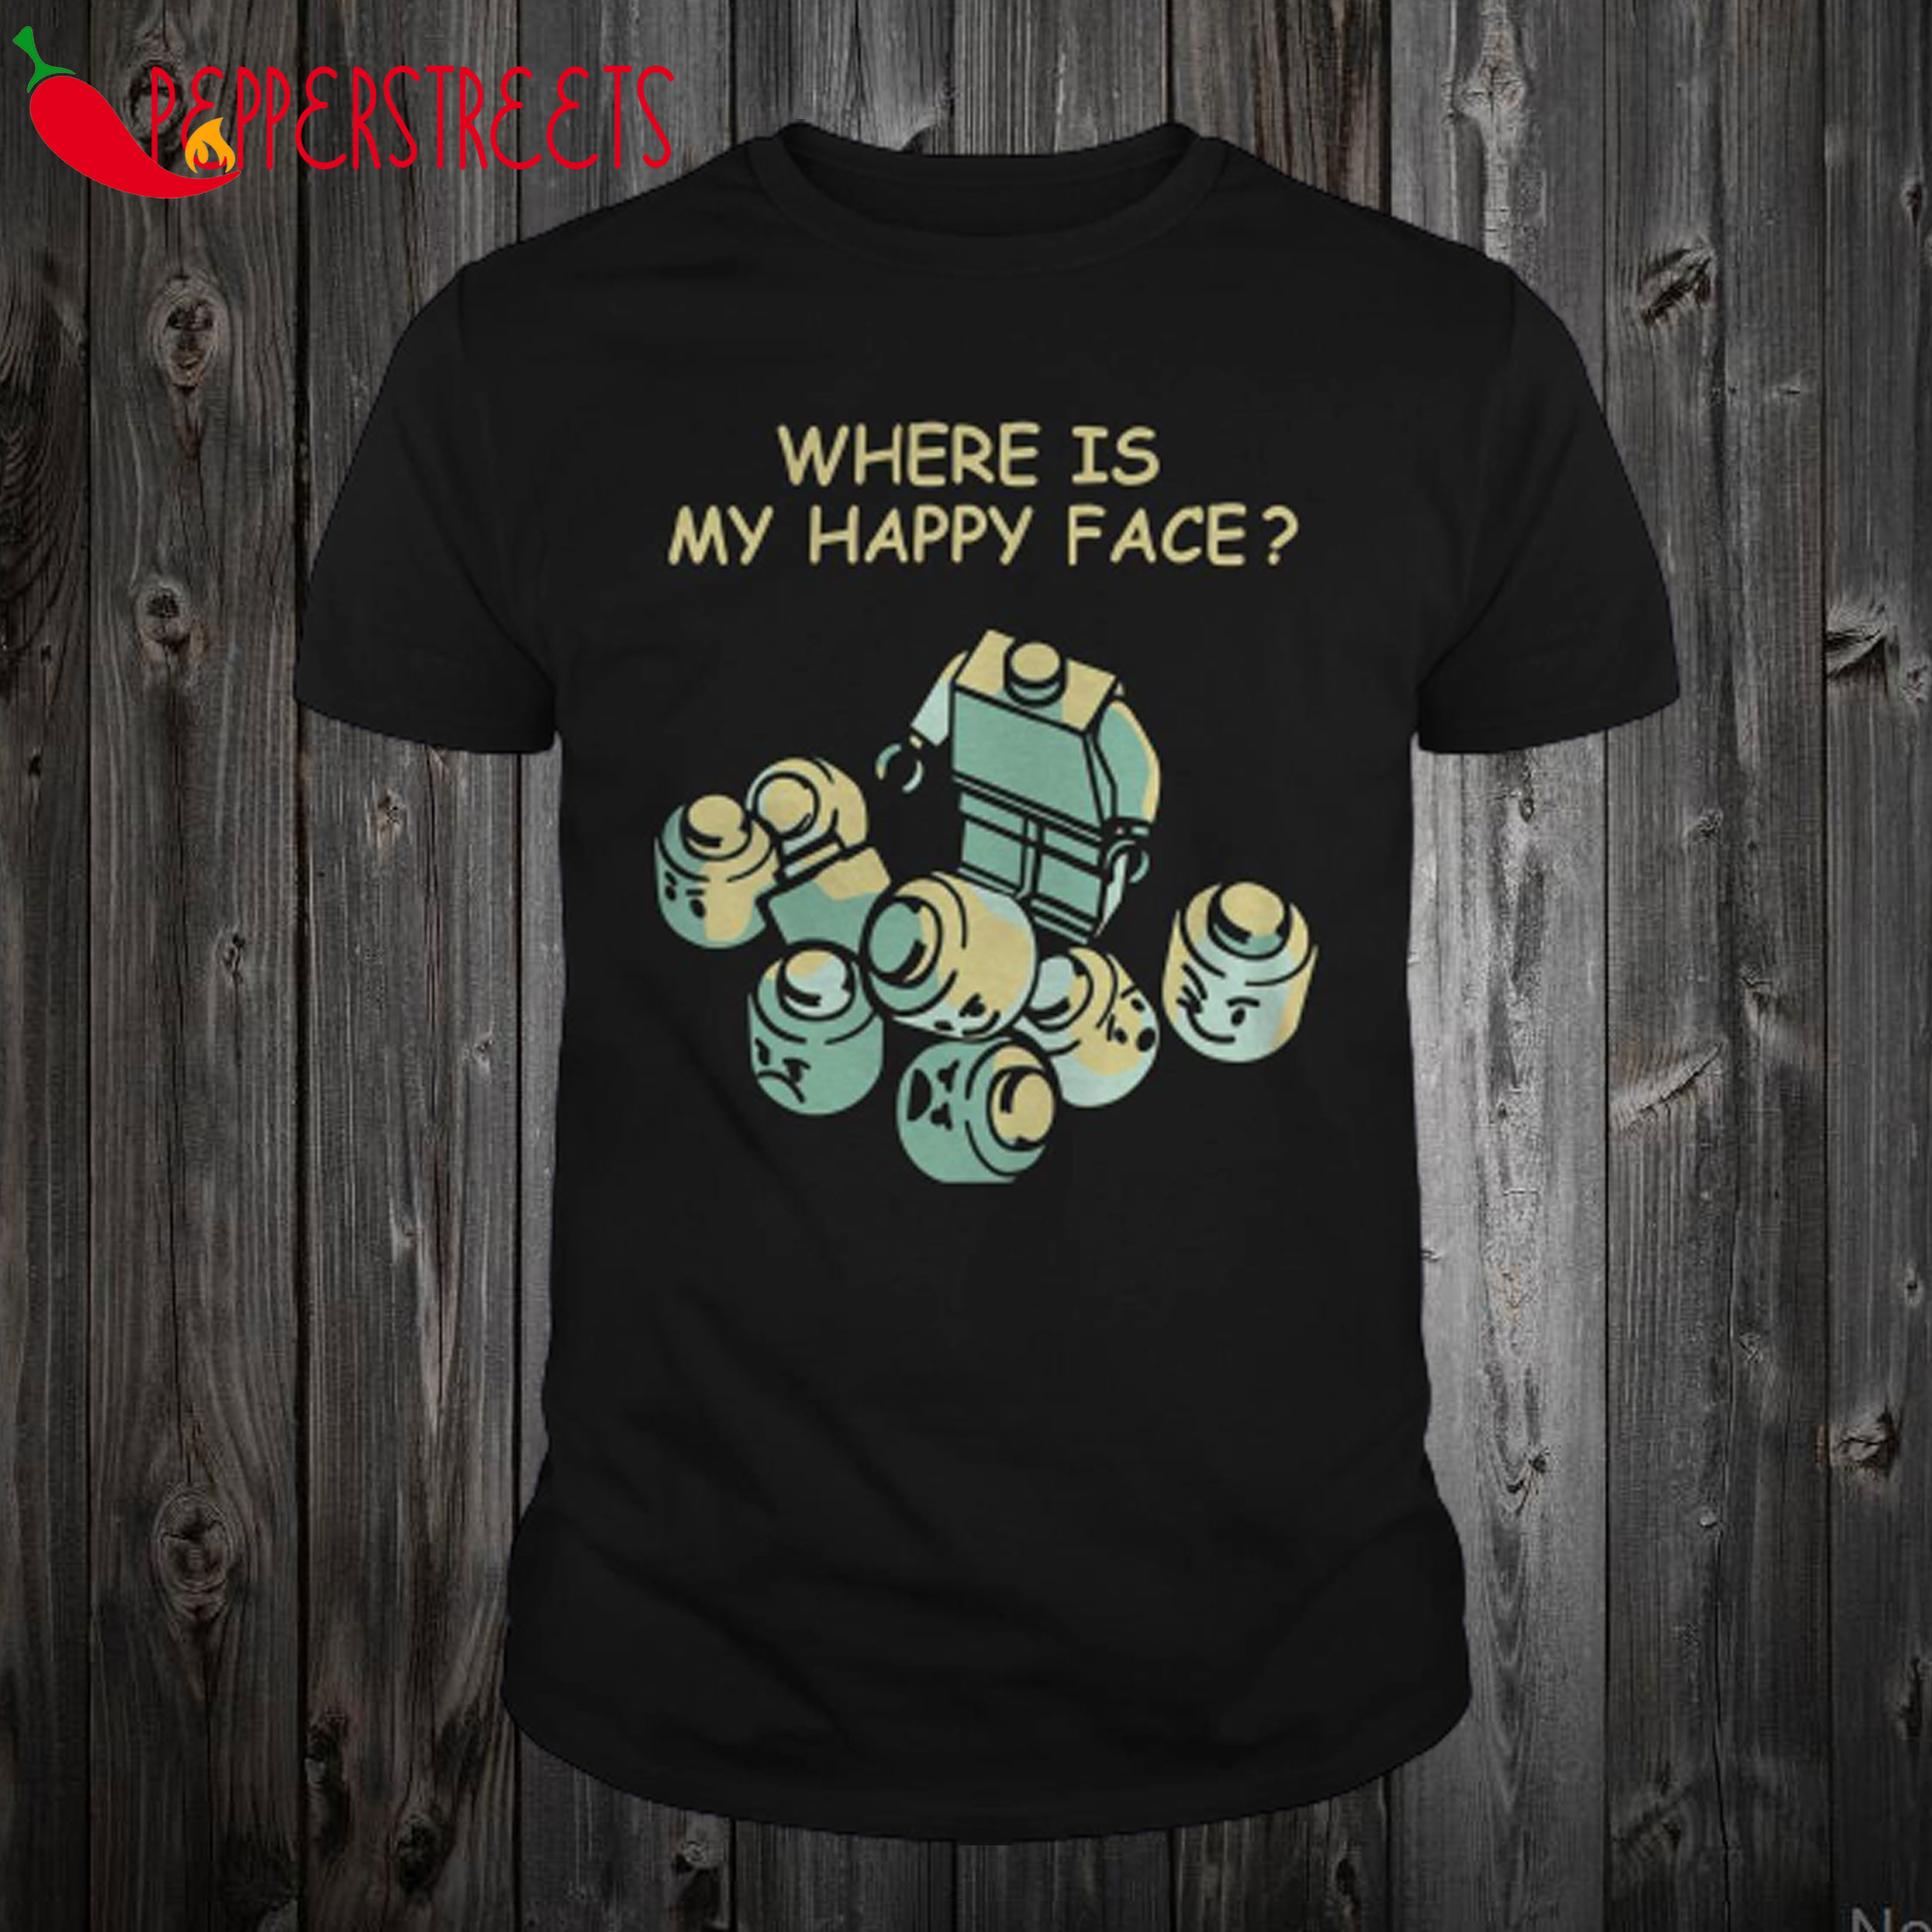 Where Is My Happy Face T ShirtWhere Is My Happy Face T Shirt